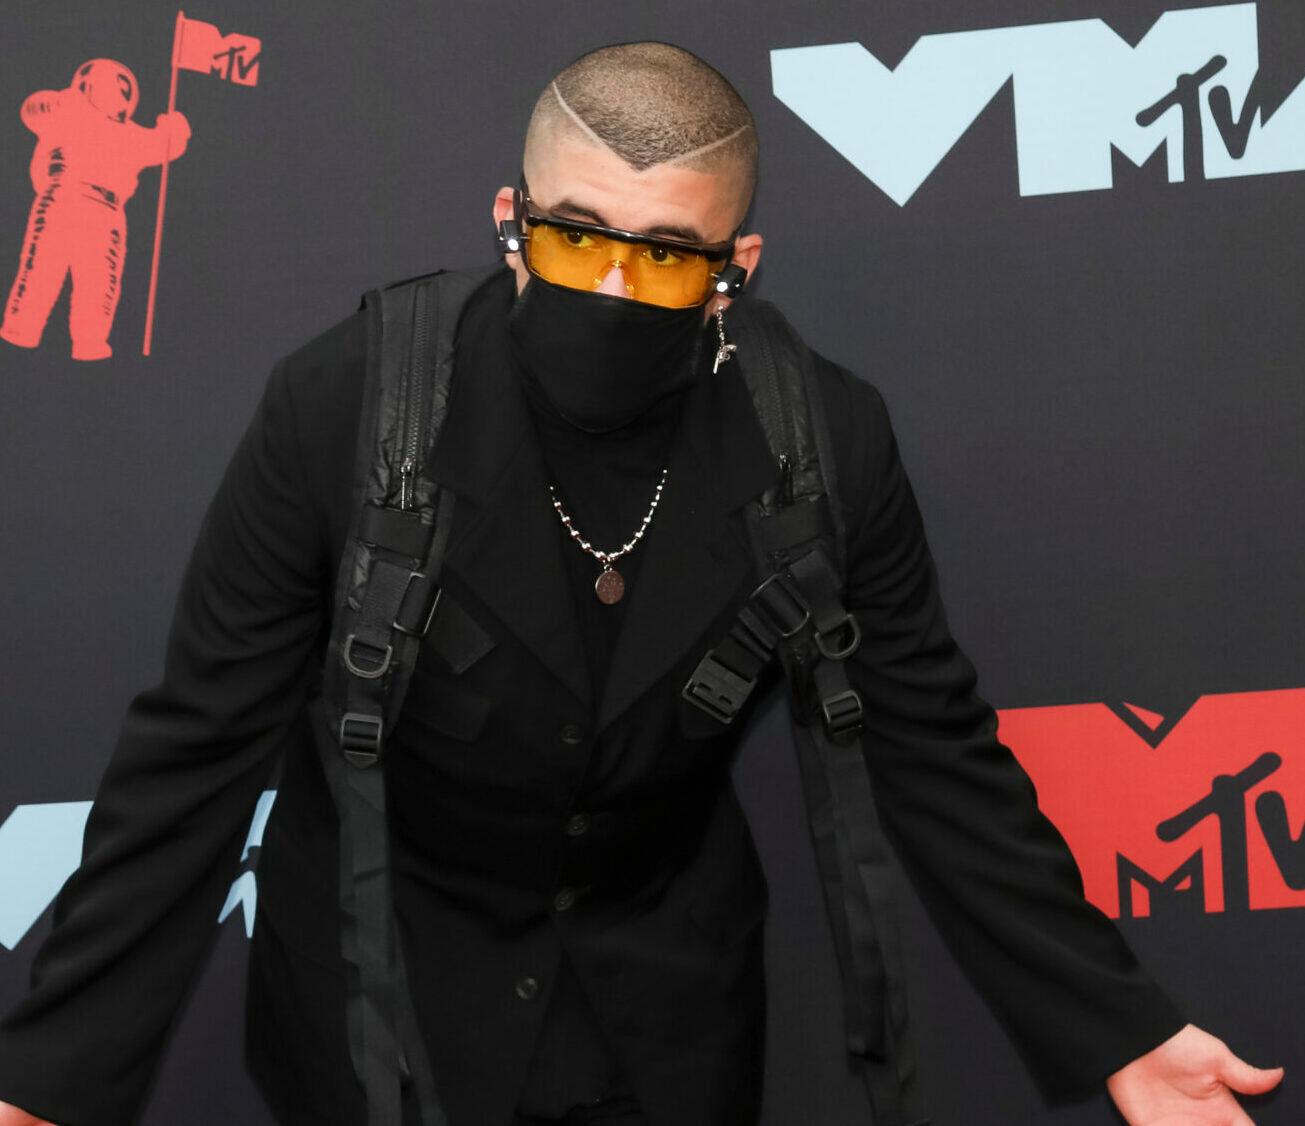 Bad Bunny attends the 2019 MTV Video Music Awards, VMAs, at Prudential Center in Newark, New Jersey, USA, on 26 August 2019.